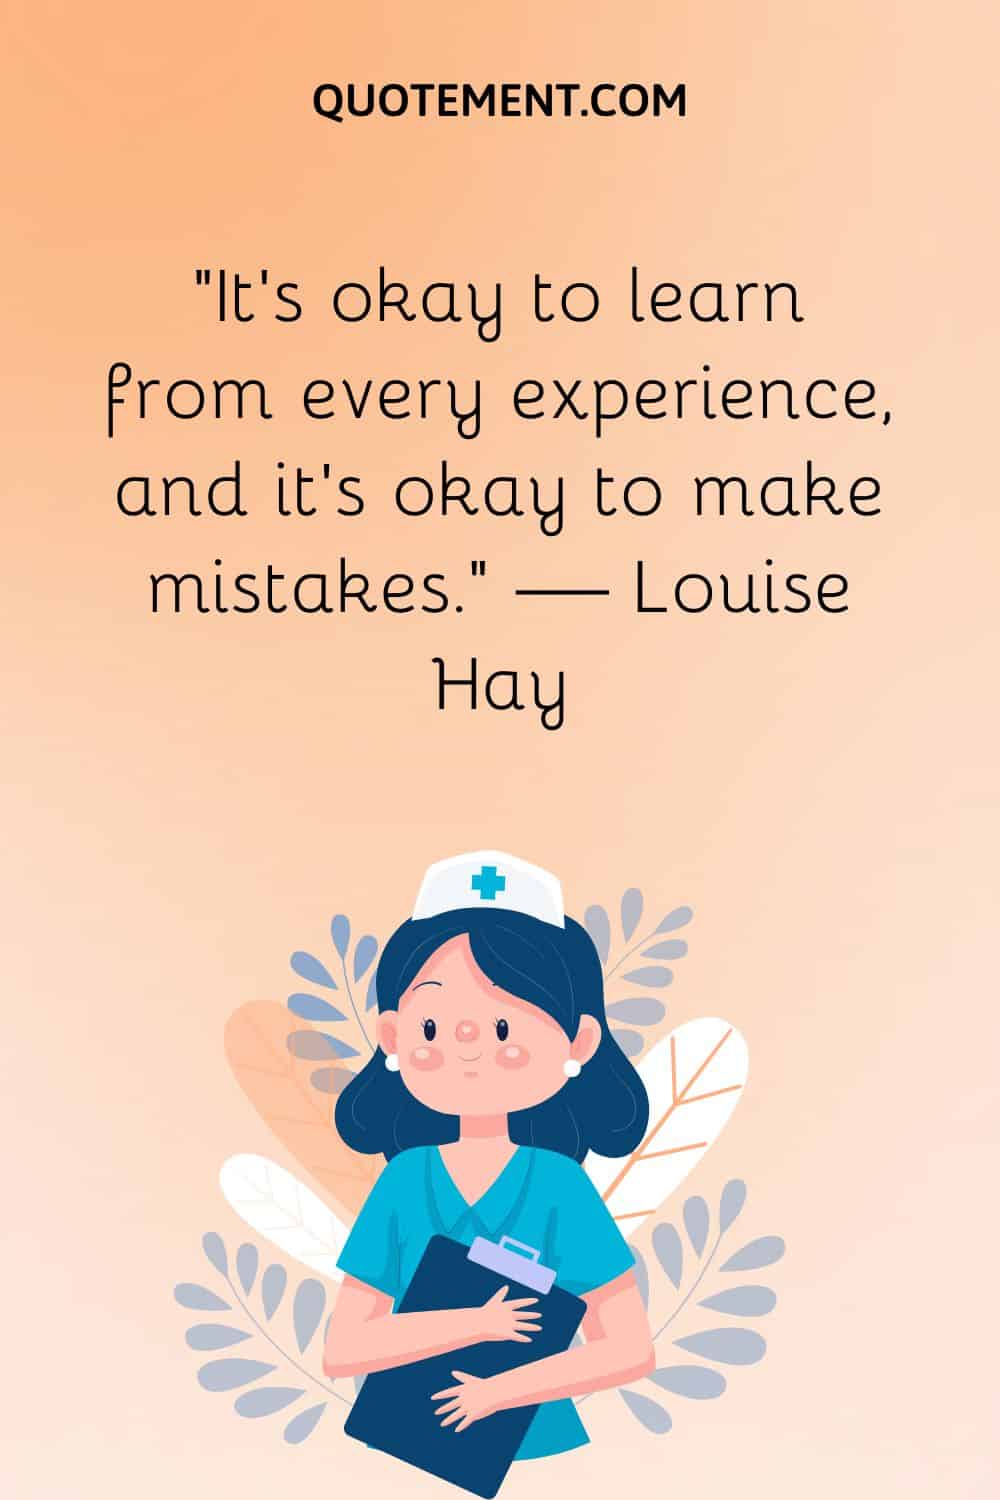 “It’s okay to learn from every experience, and it’s okay to make mistakes.” — Louise Hay